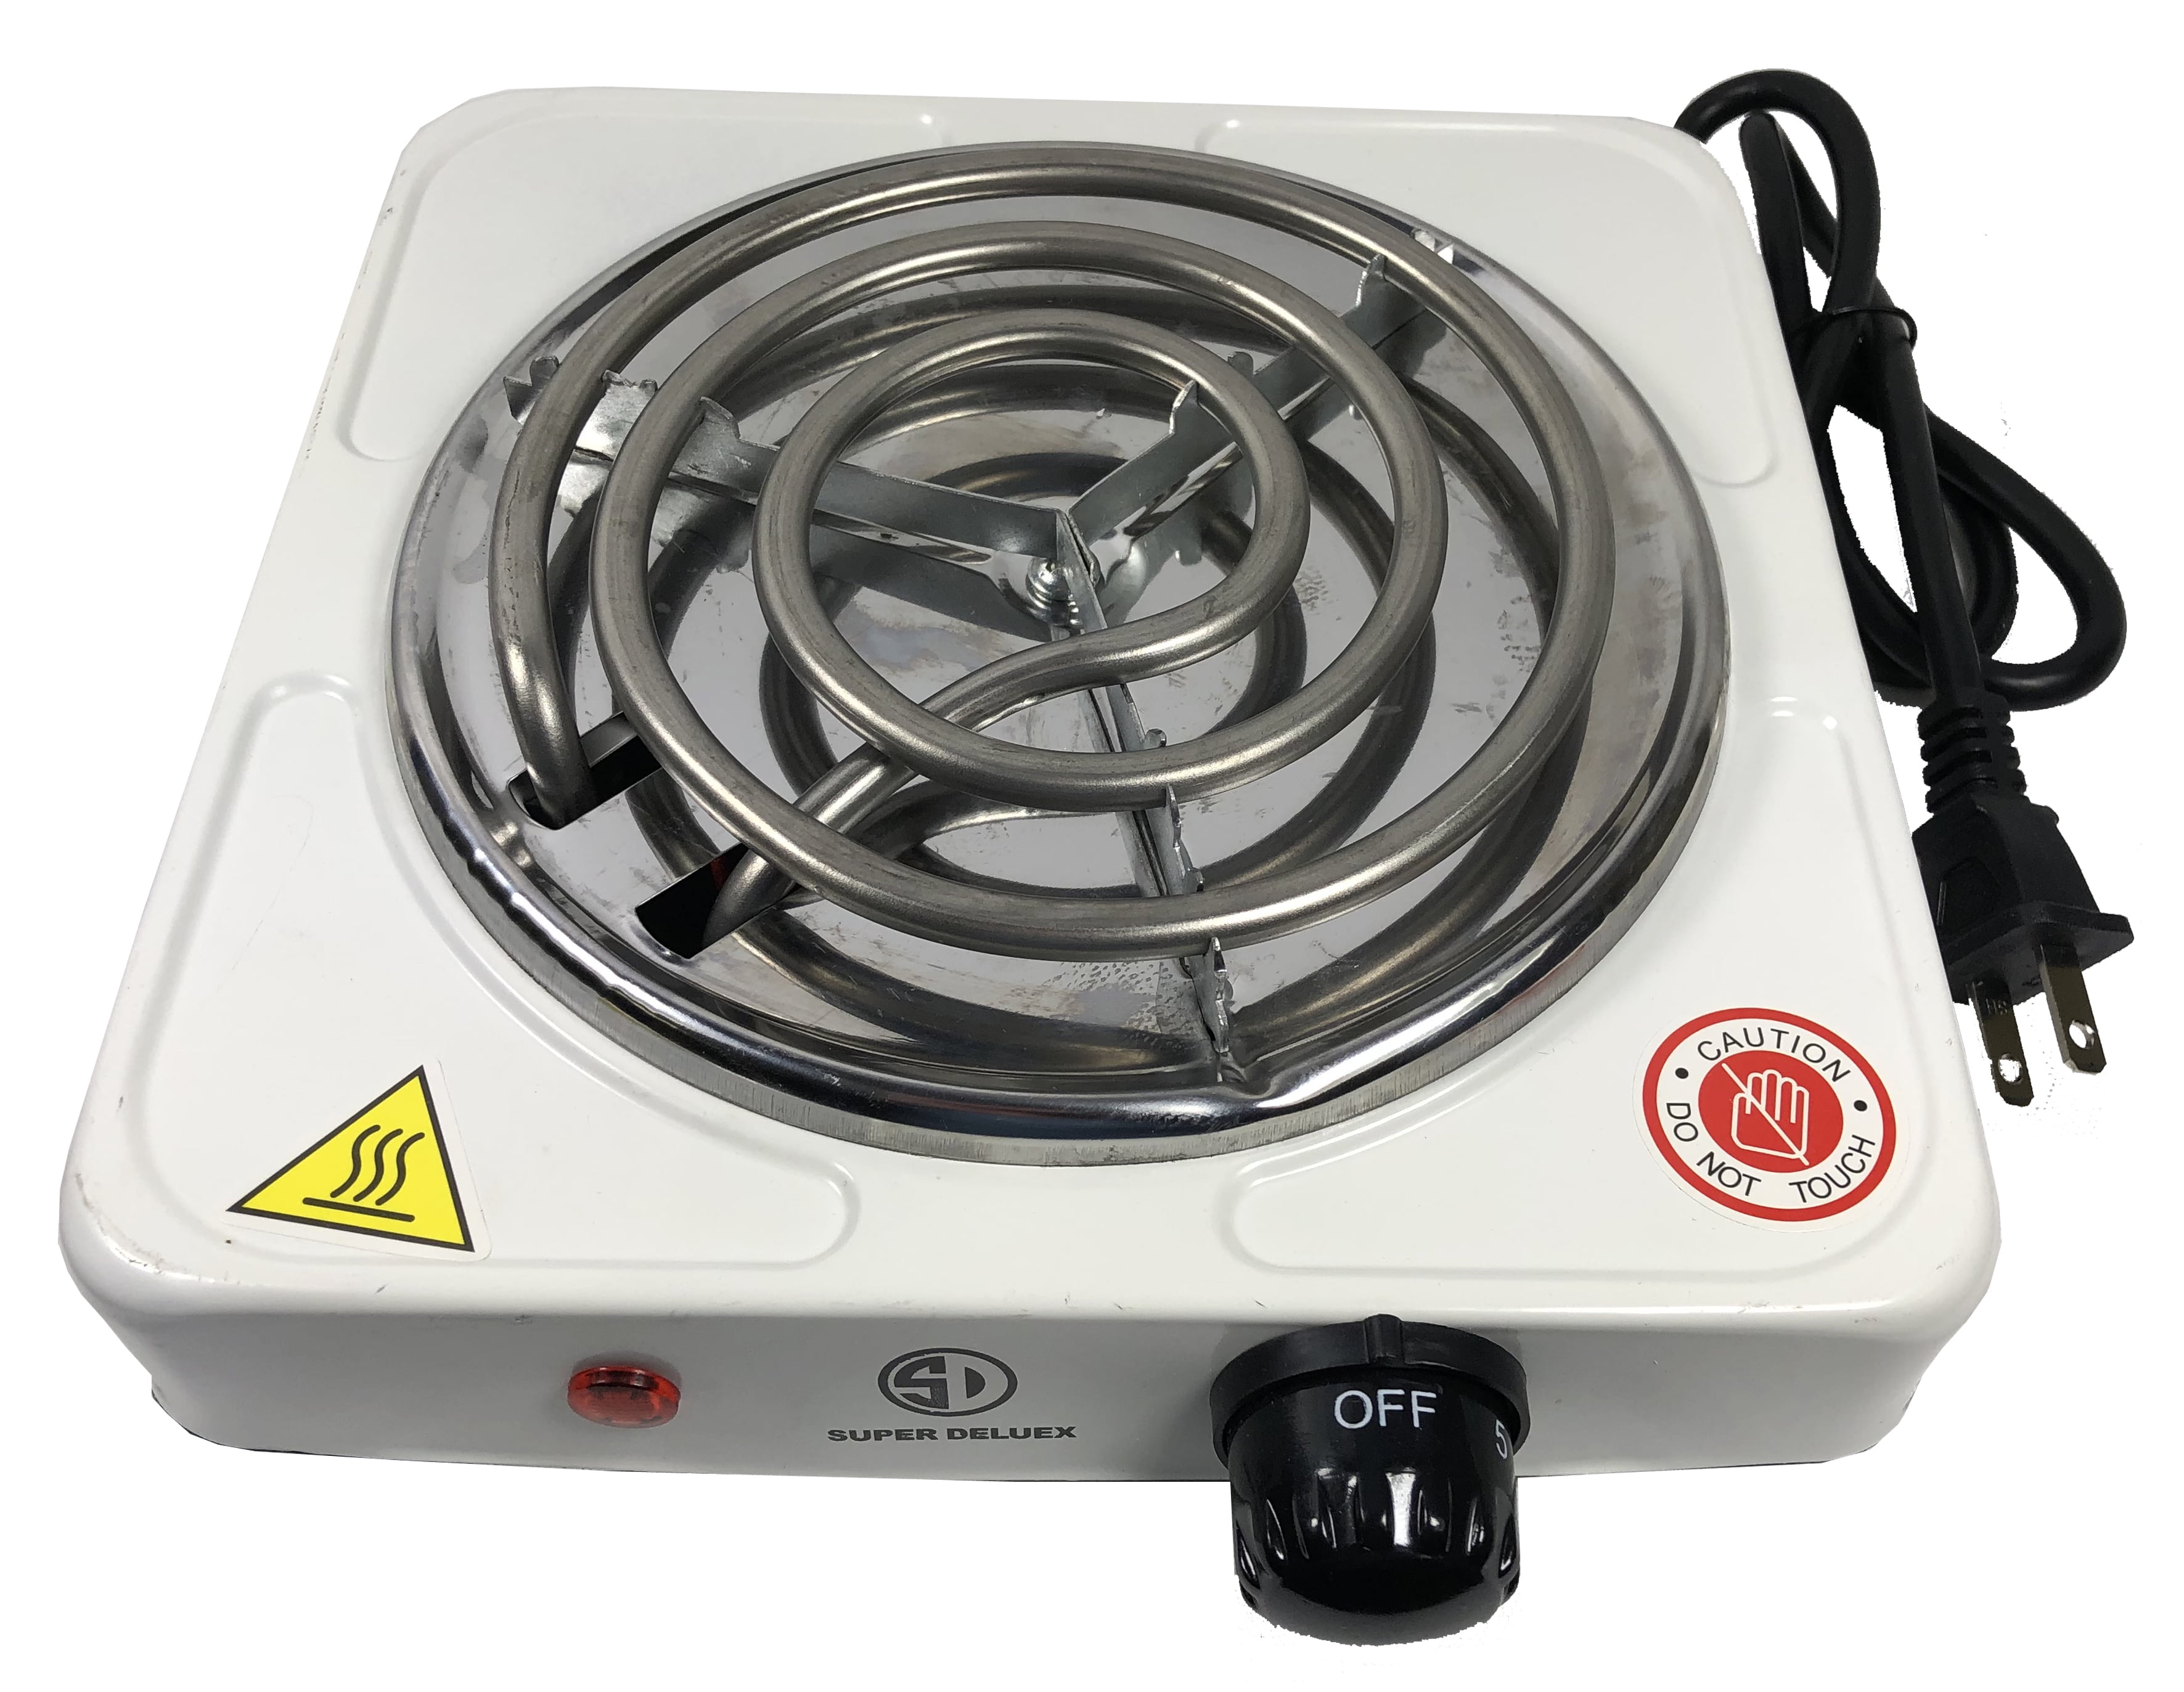 KOCONIC Upgraded to 1800W Single Burner,Electric Cooktop,Hot plate for -  household items - by owner - housewares sale